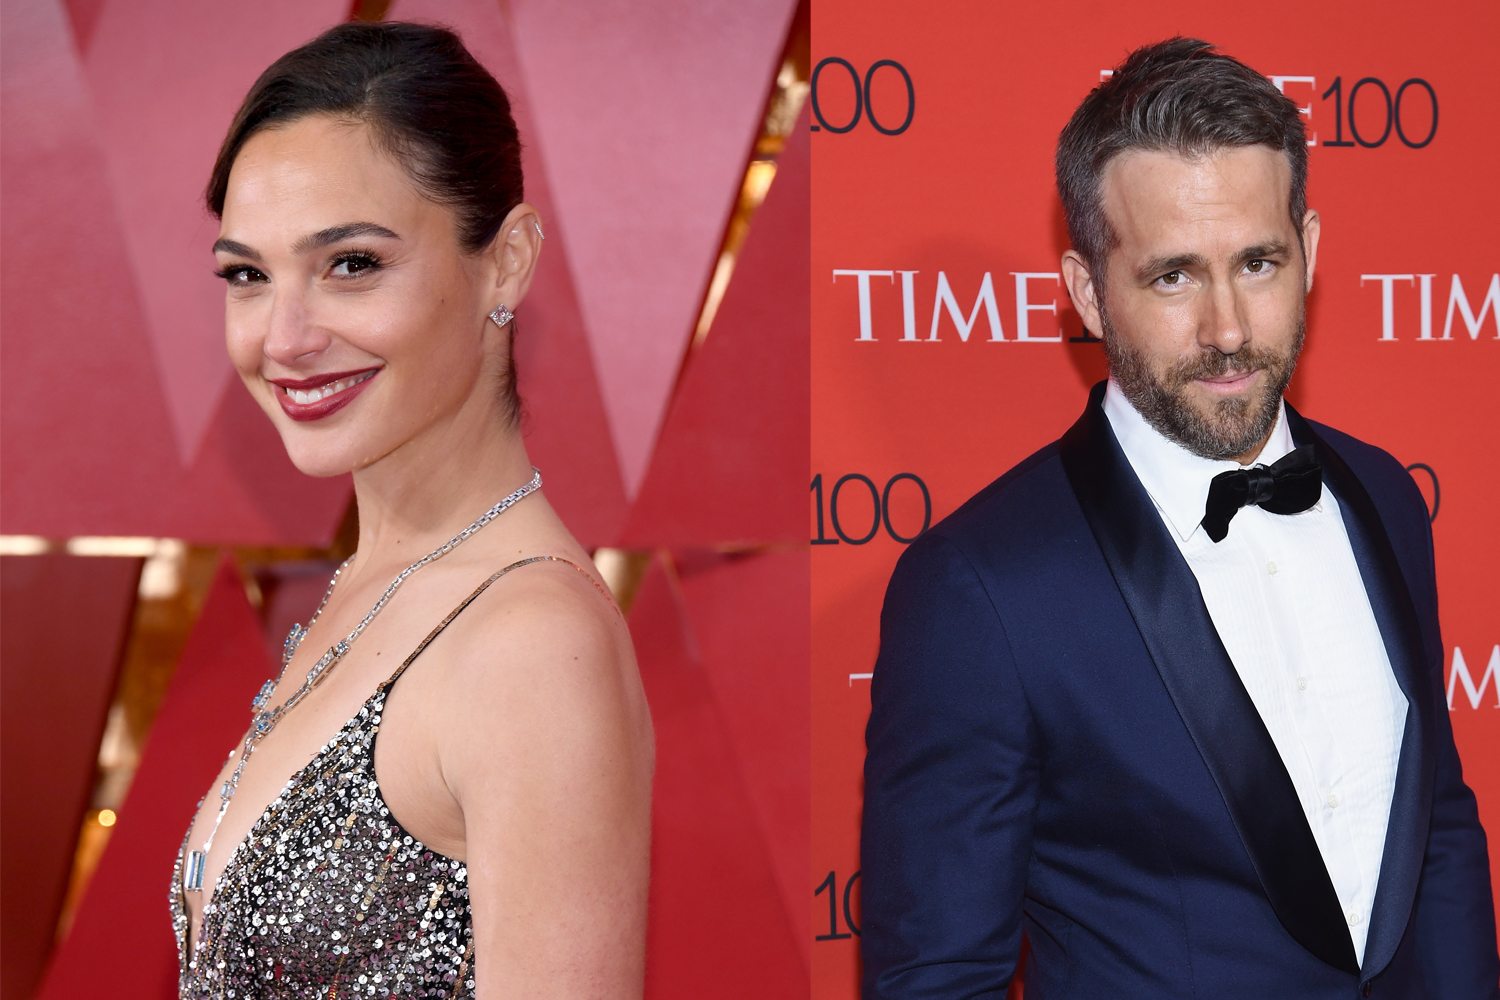 Ryan Reynolds And Gal Gadot's Funny Twitter Feud - Simplemost